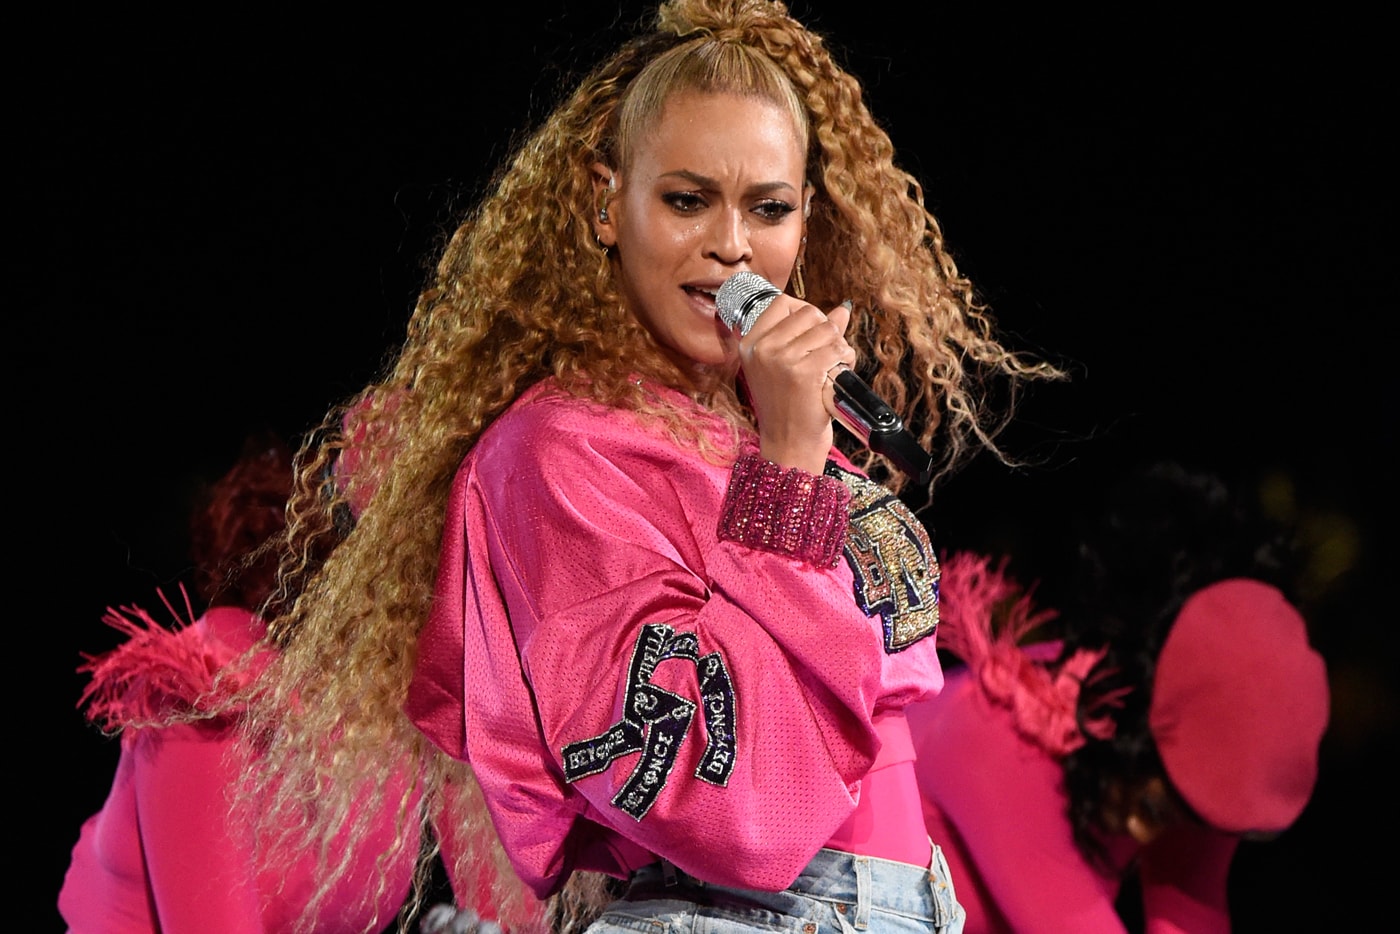 Beyonce's 2016 "Formation World Tour" Has Already Grossed Over $100 Million in Ticket Sales